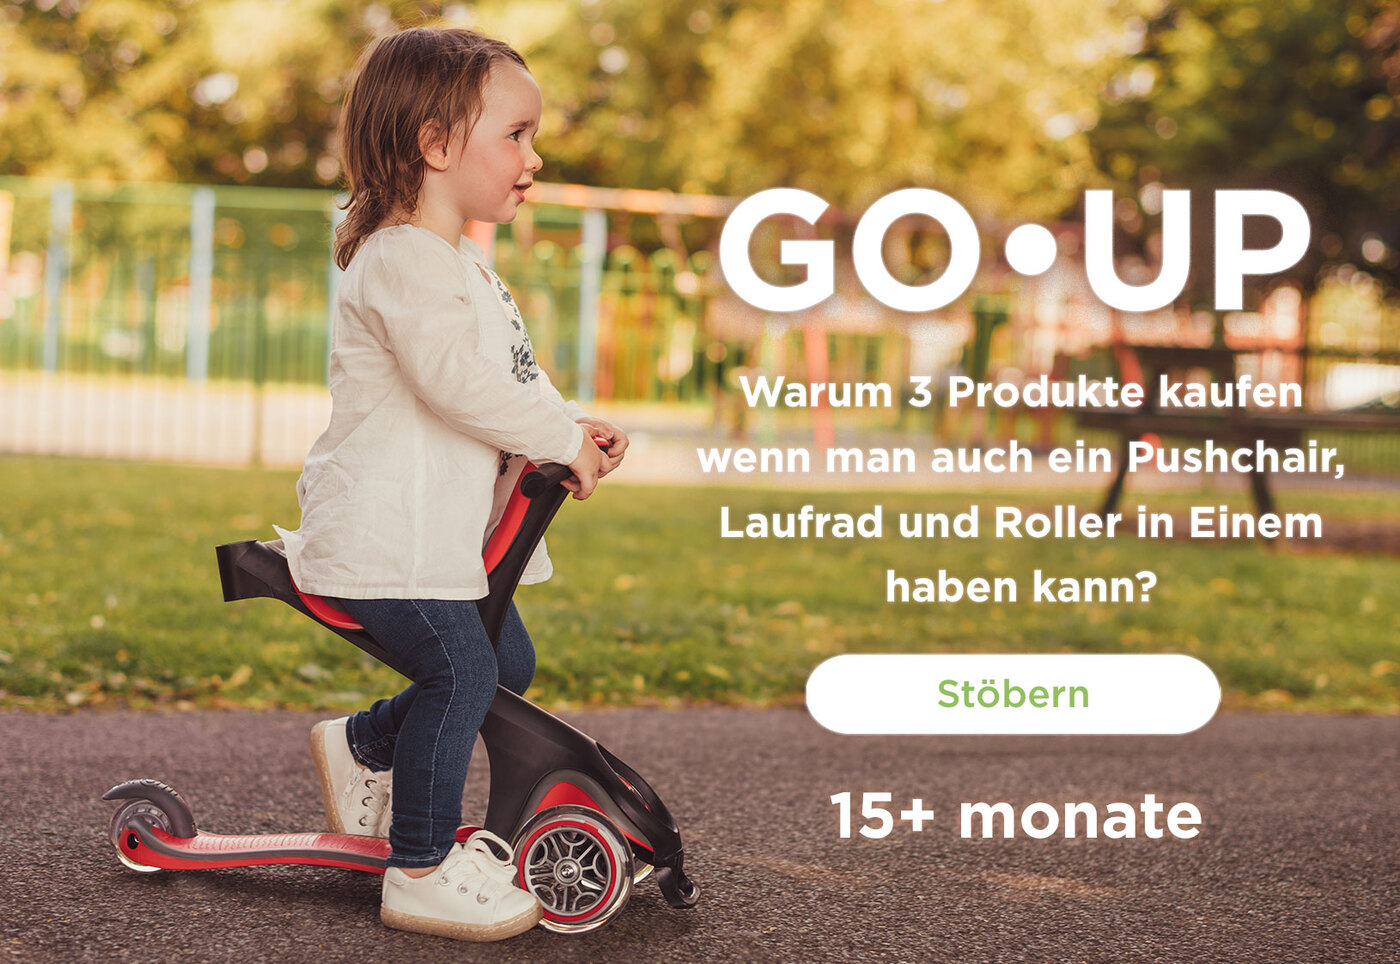 Why buy 3 products when you can get a ride-on, walking bike & scooter all-in-one?